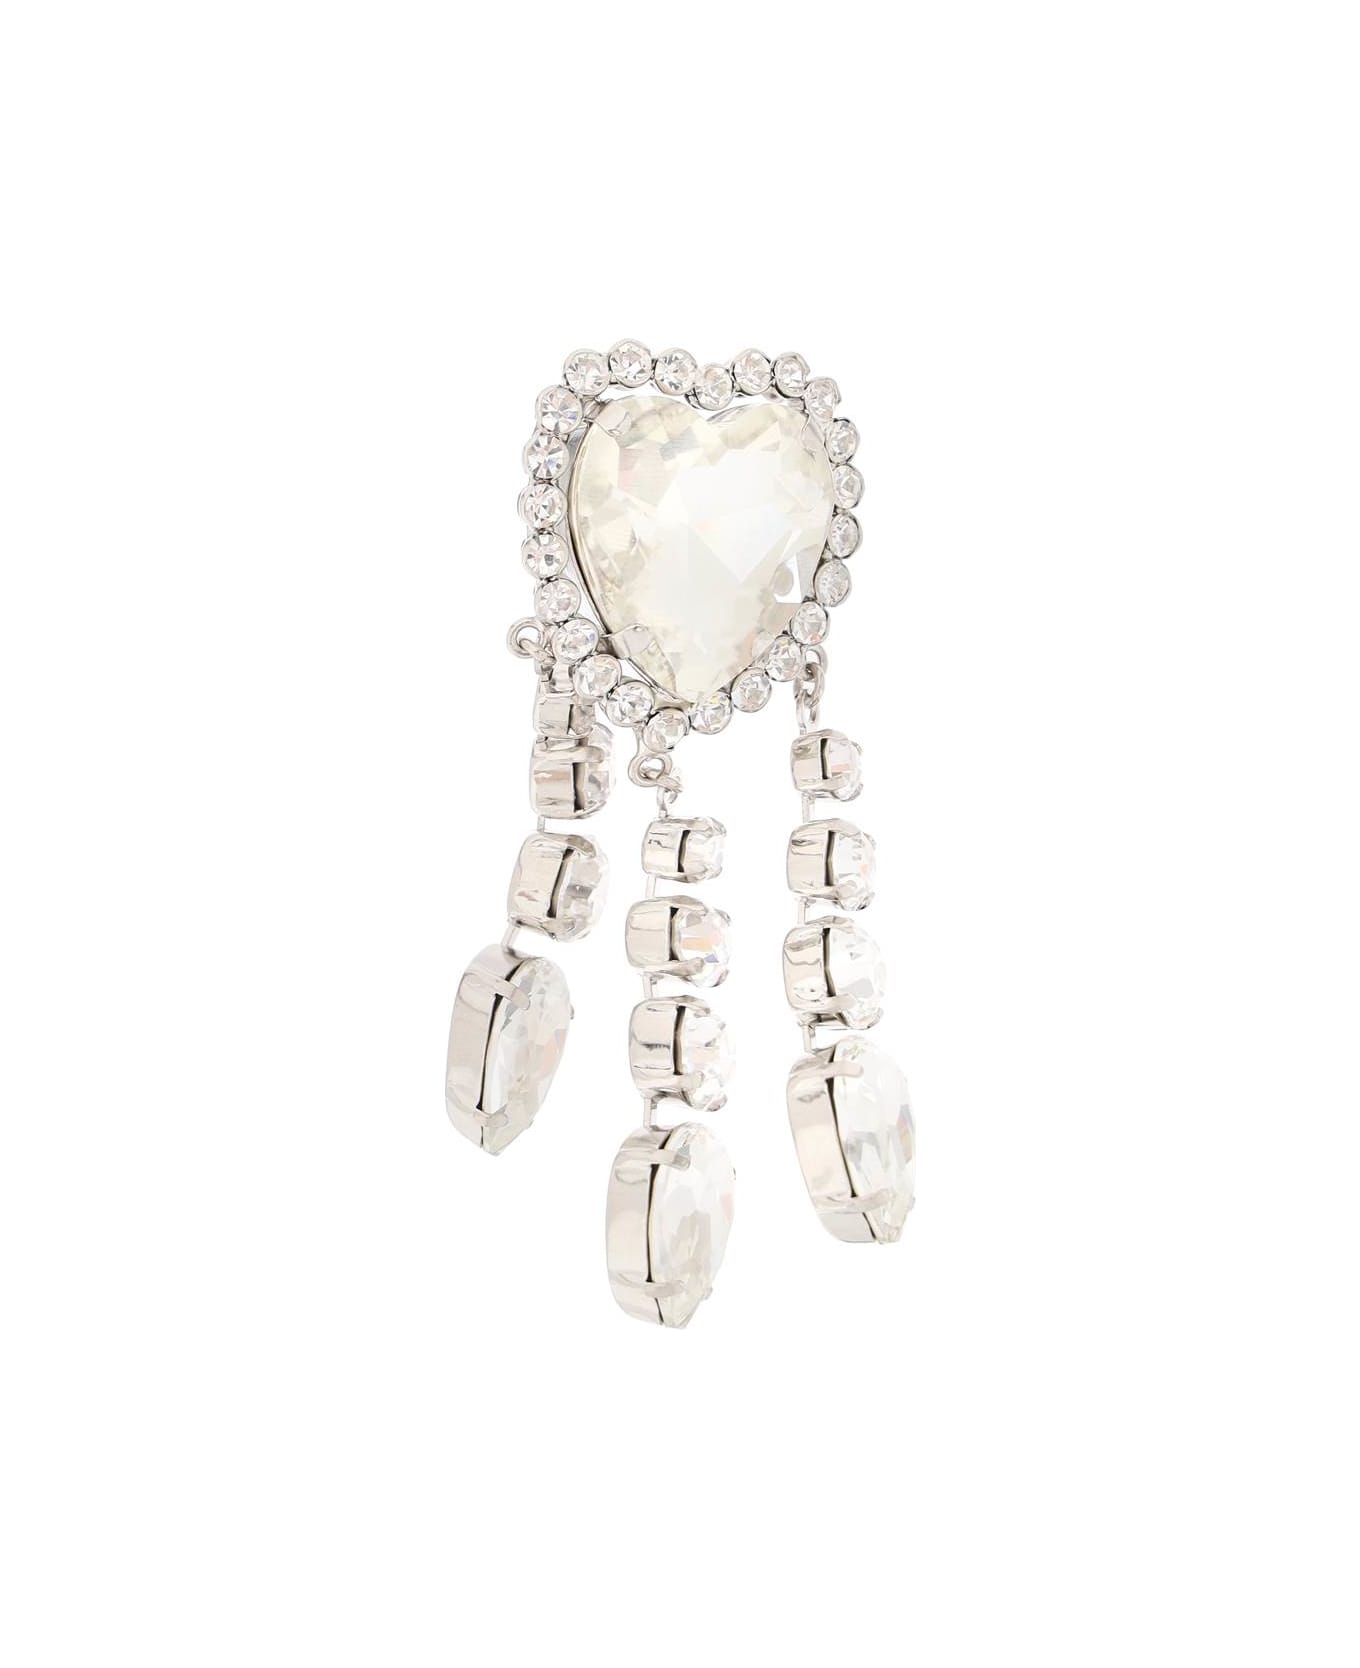 Alessandra Rich Heart Earrings With Pendants - CRYSTAL SILVER (Silver) イヤリング